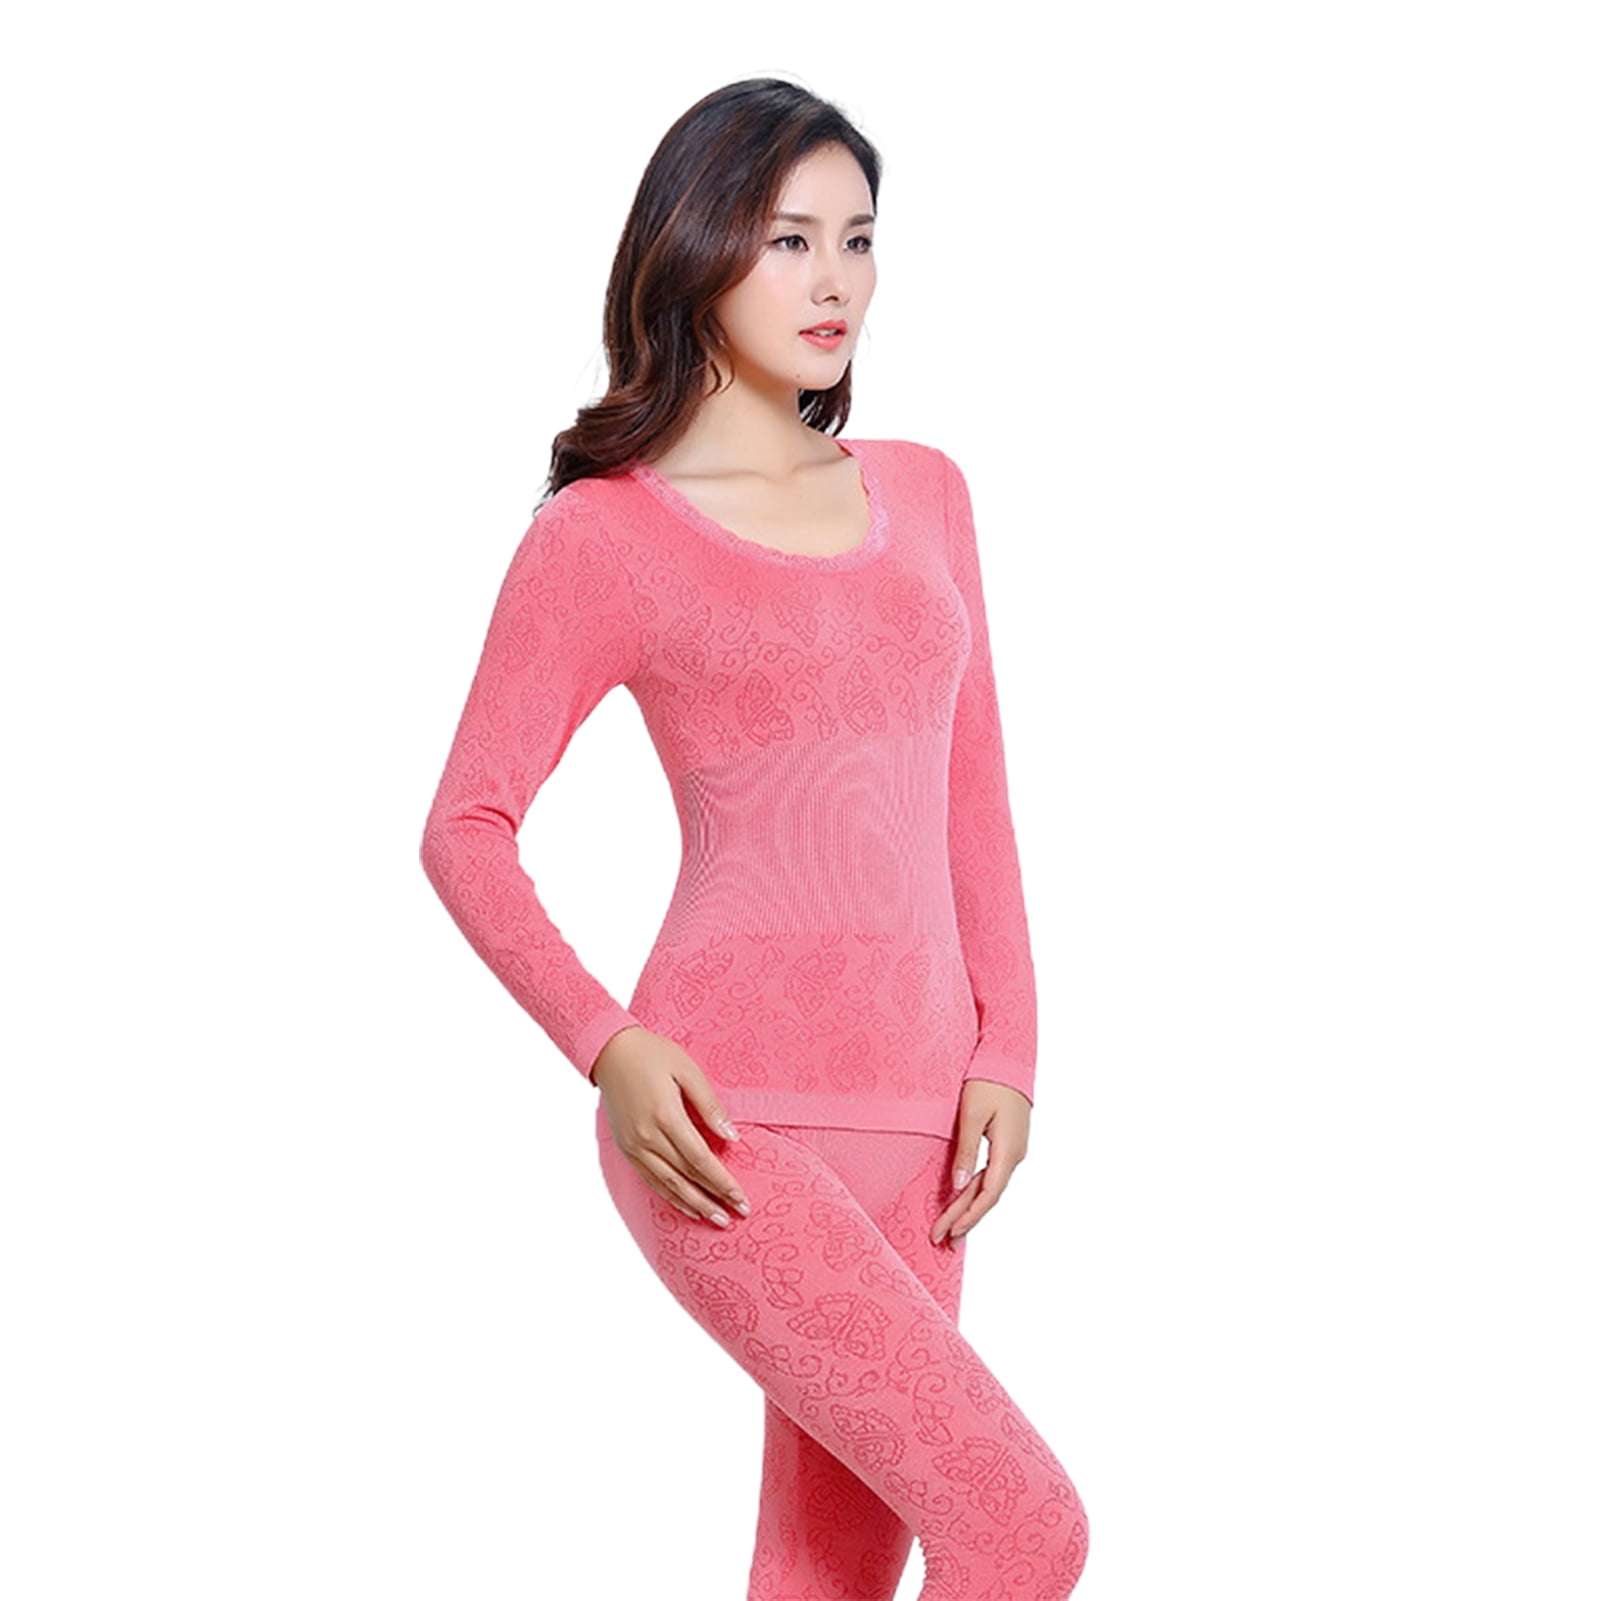 Medium-high Collar Thermal Underwear for Women Thickened Solid Colour  Cotton Jumper Set for Winter Autumn Warm (Color : Pink, Size : X-Large)